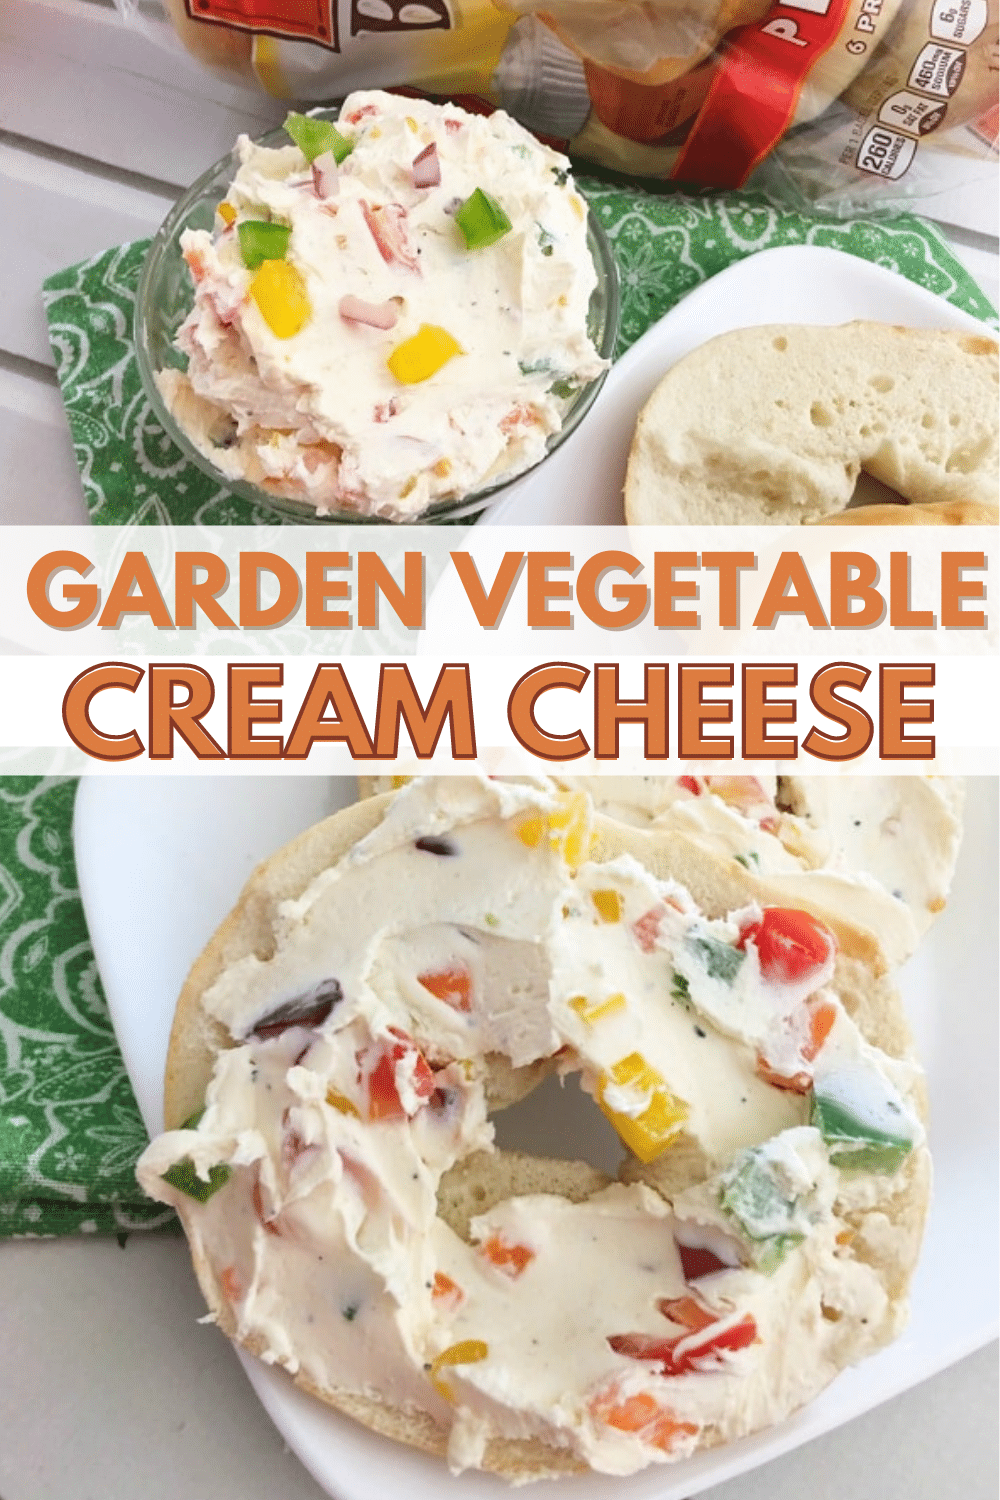 I love how colorful this garden vegetable cream cheese is. And I REALLY love how easy it is to make! #bagels #breakfast #creamcheese via @wondermomwannab